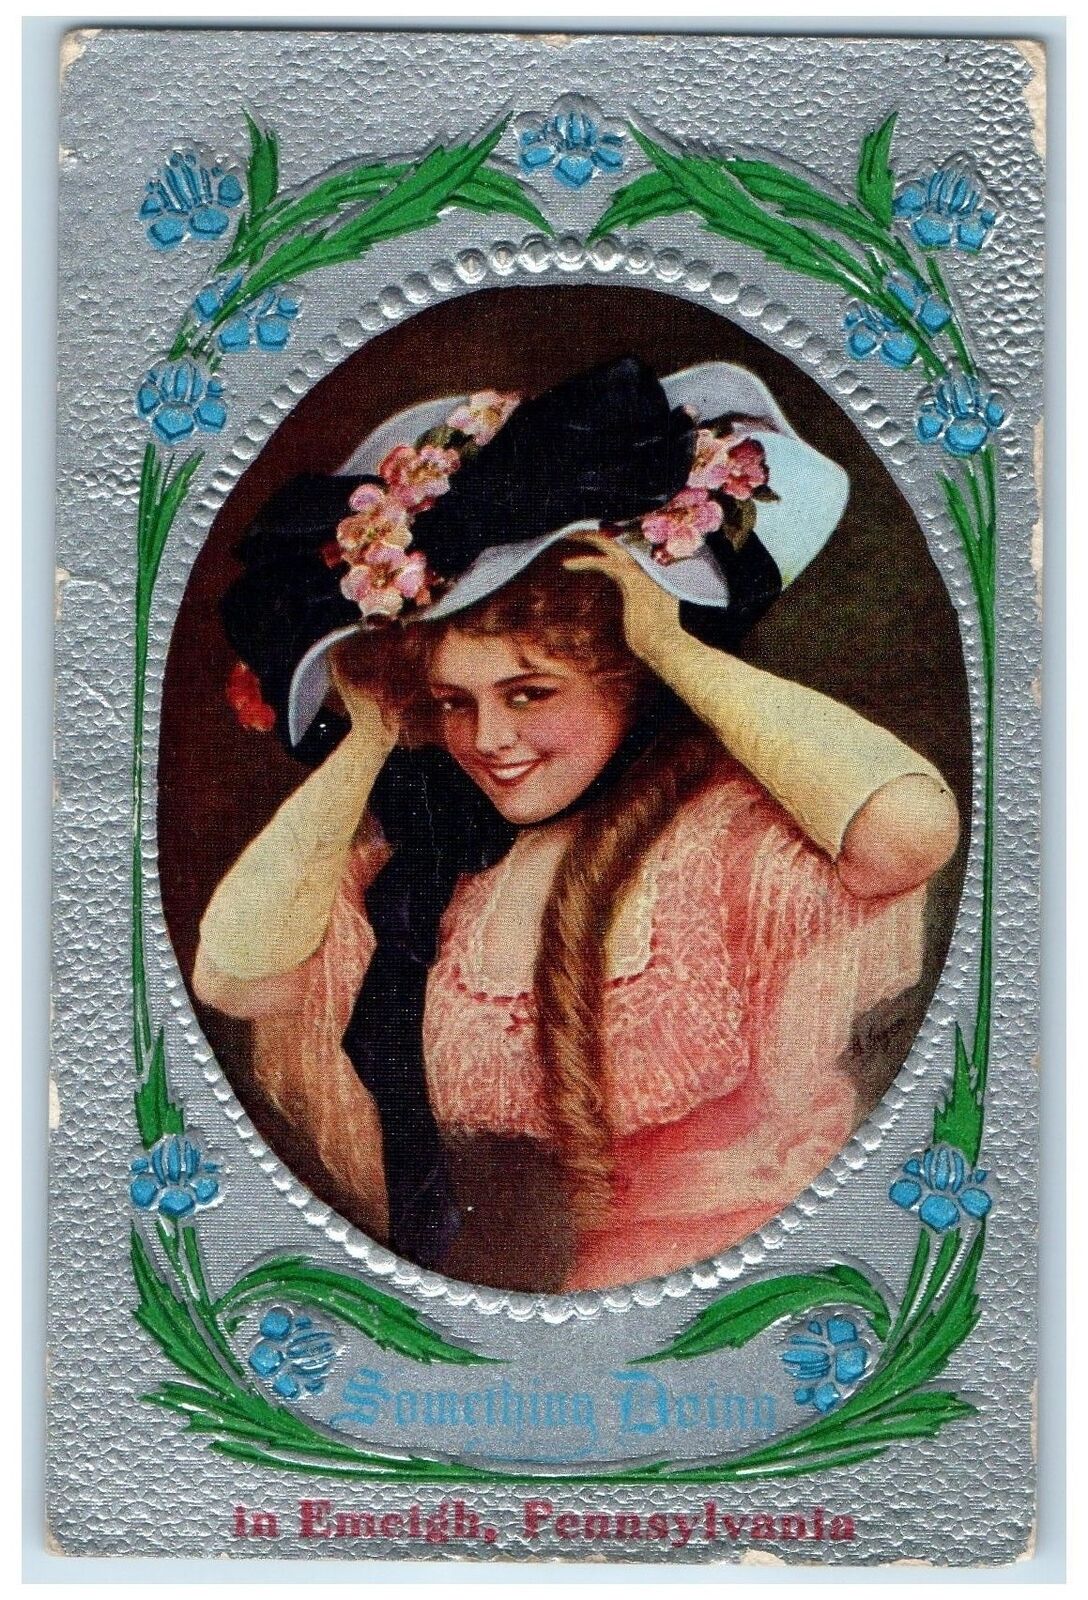 1913 Something Doing In Emeigh PA Embossed Woman Holding Vintage Hat Postcard